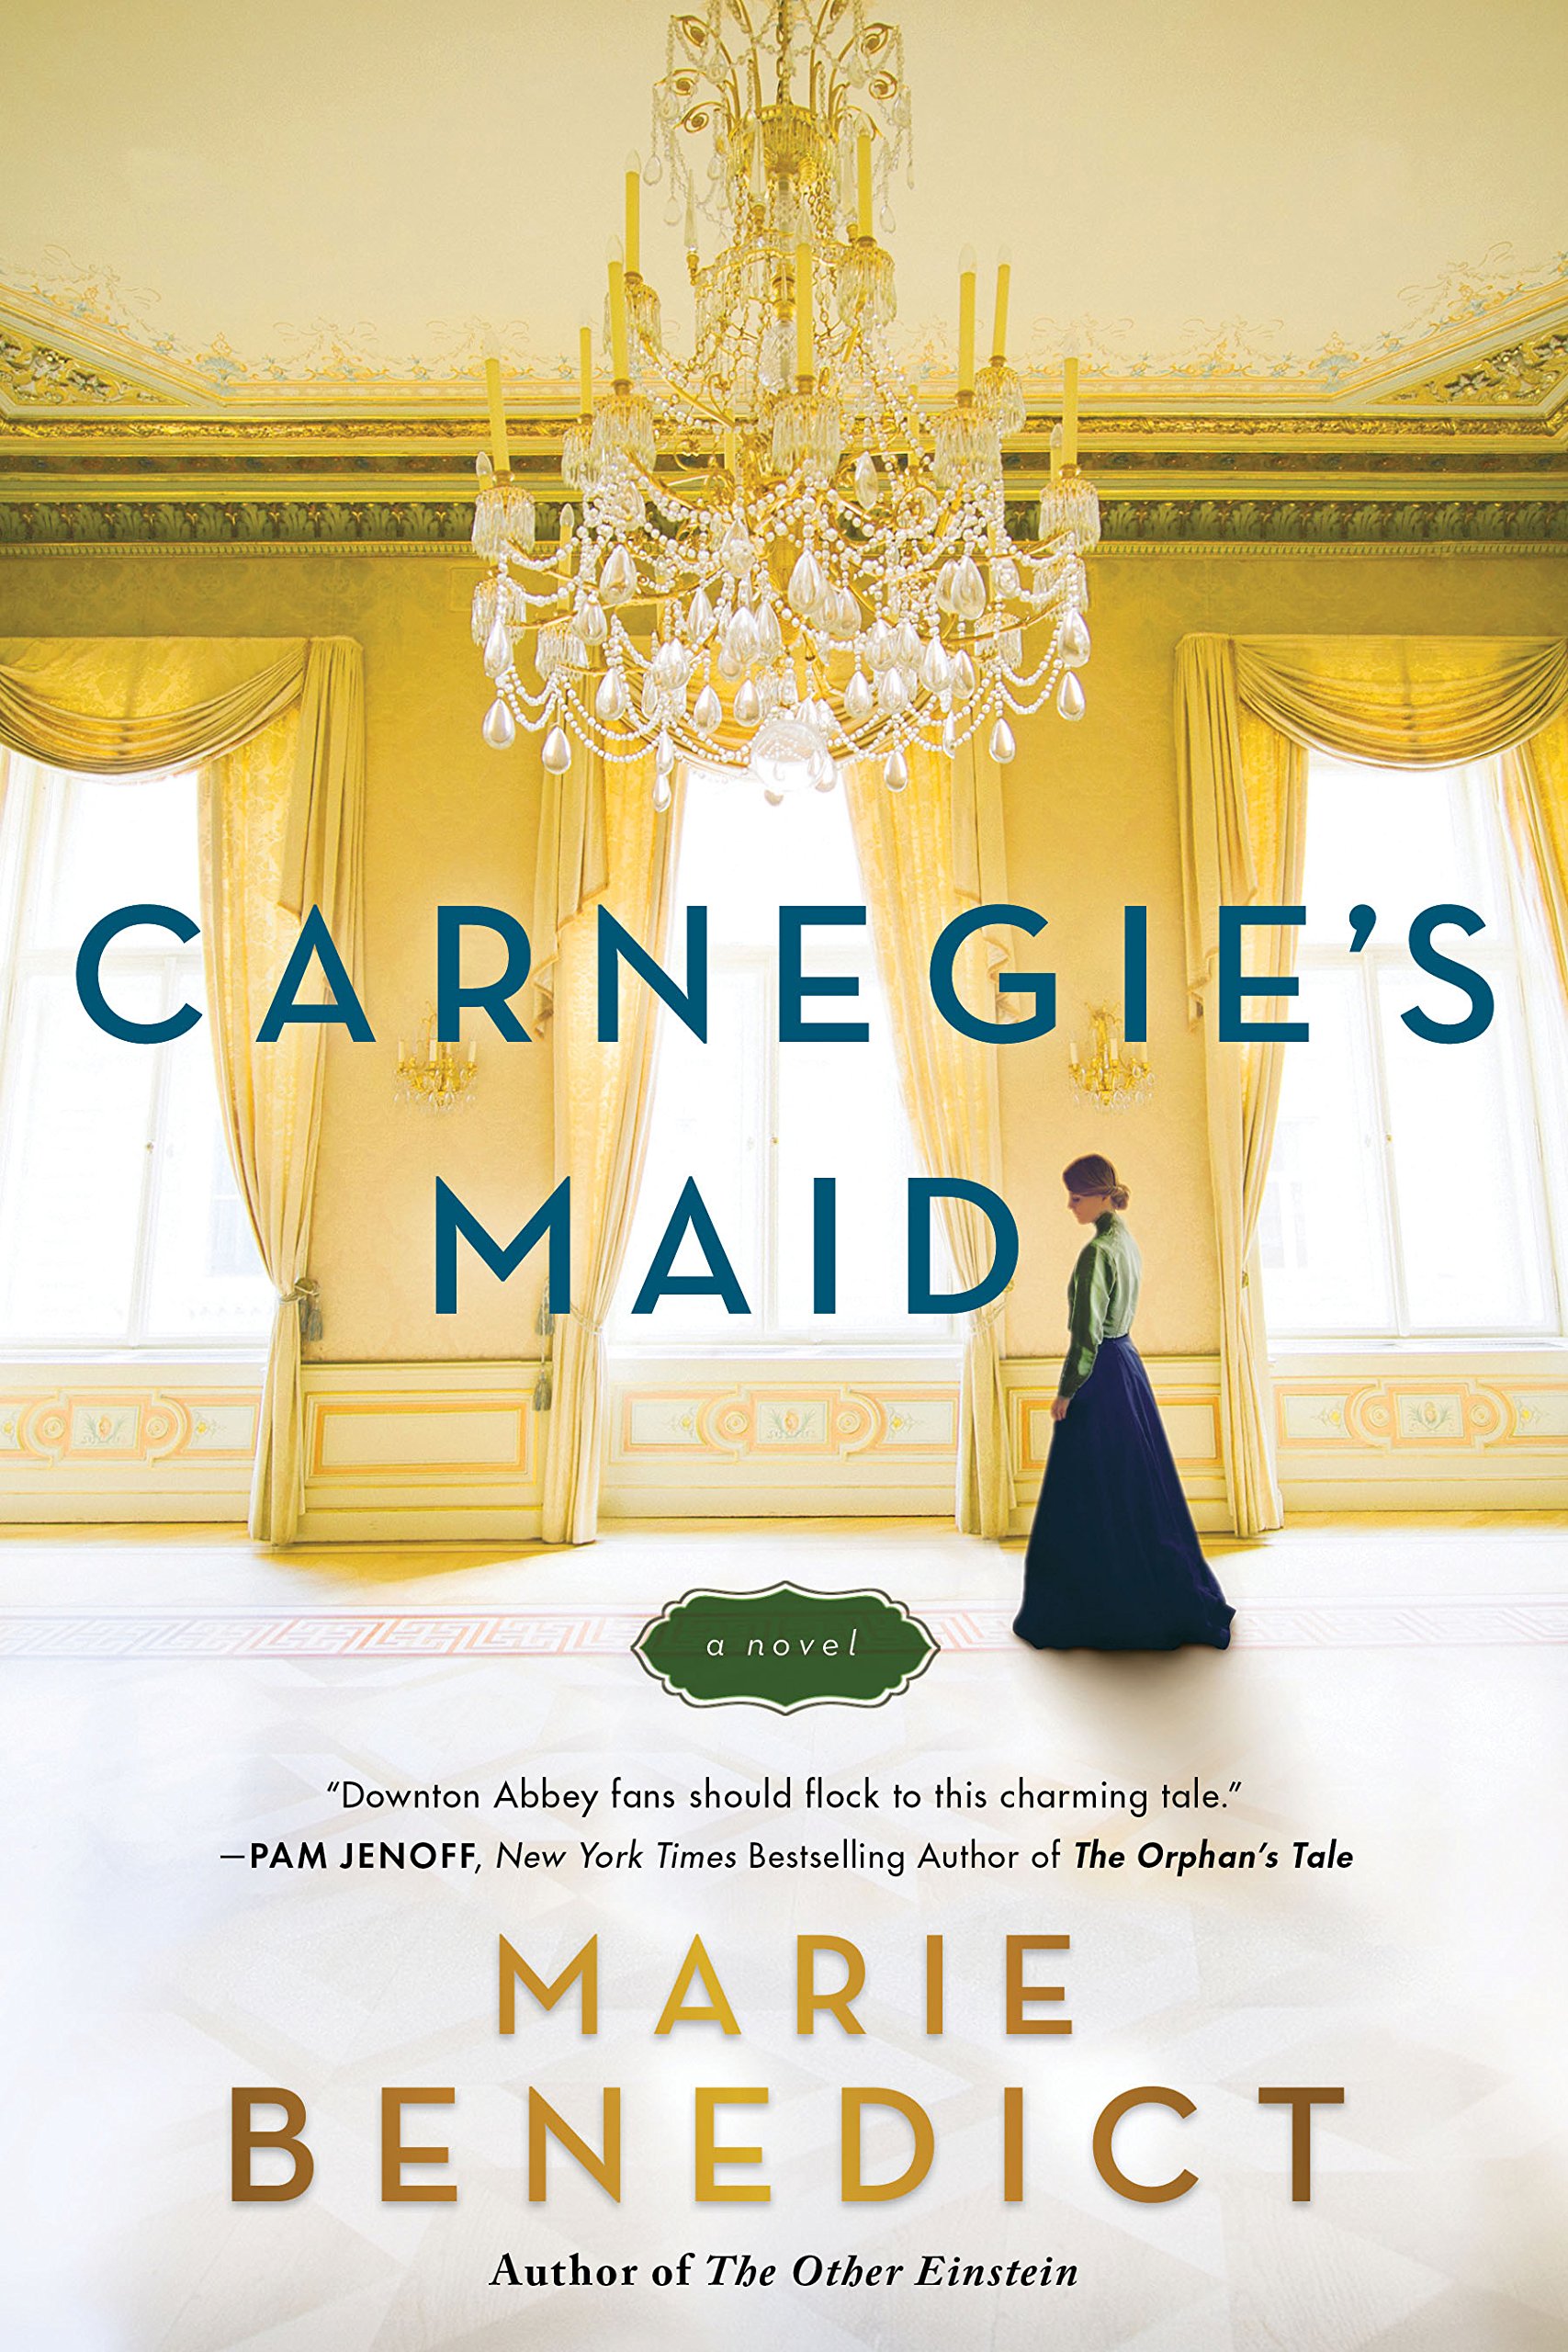 "Carnegie's Maid" by Marie Benedict